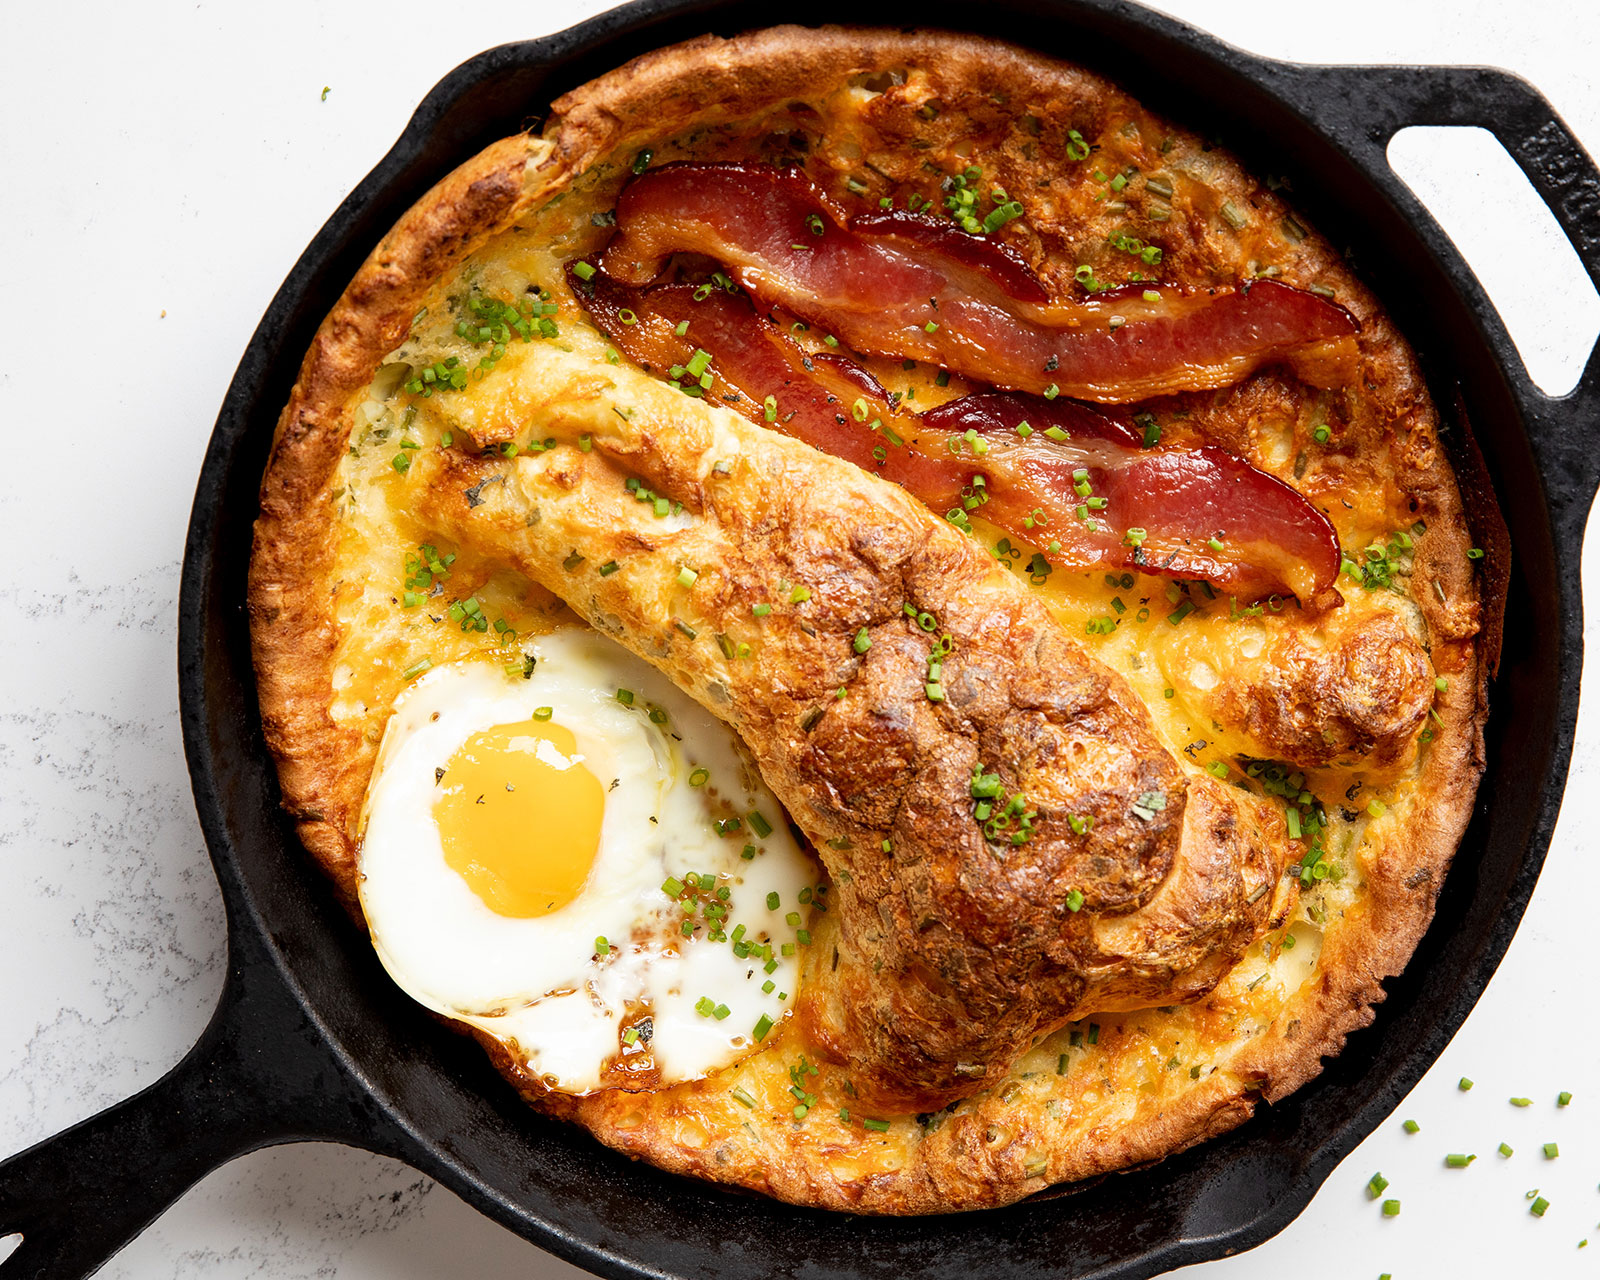 Smoked Cheddar Dutch Baby with Maple Bacon and Fried Eggs